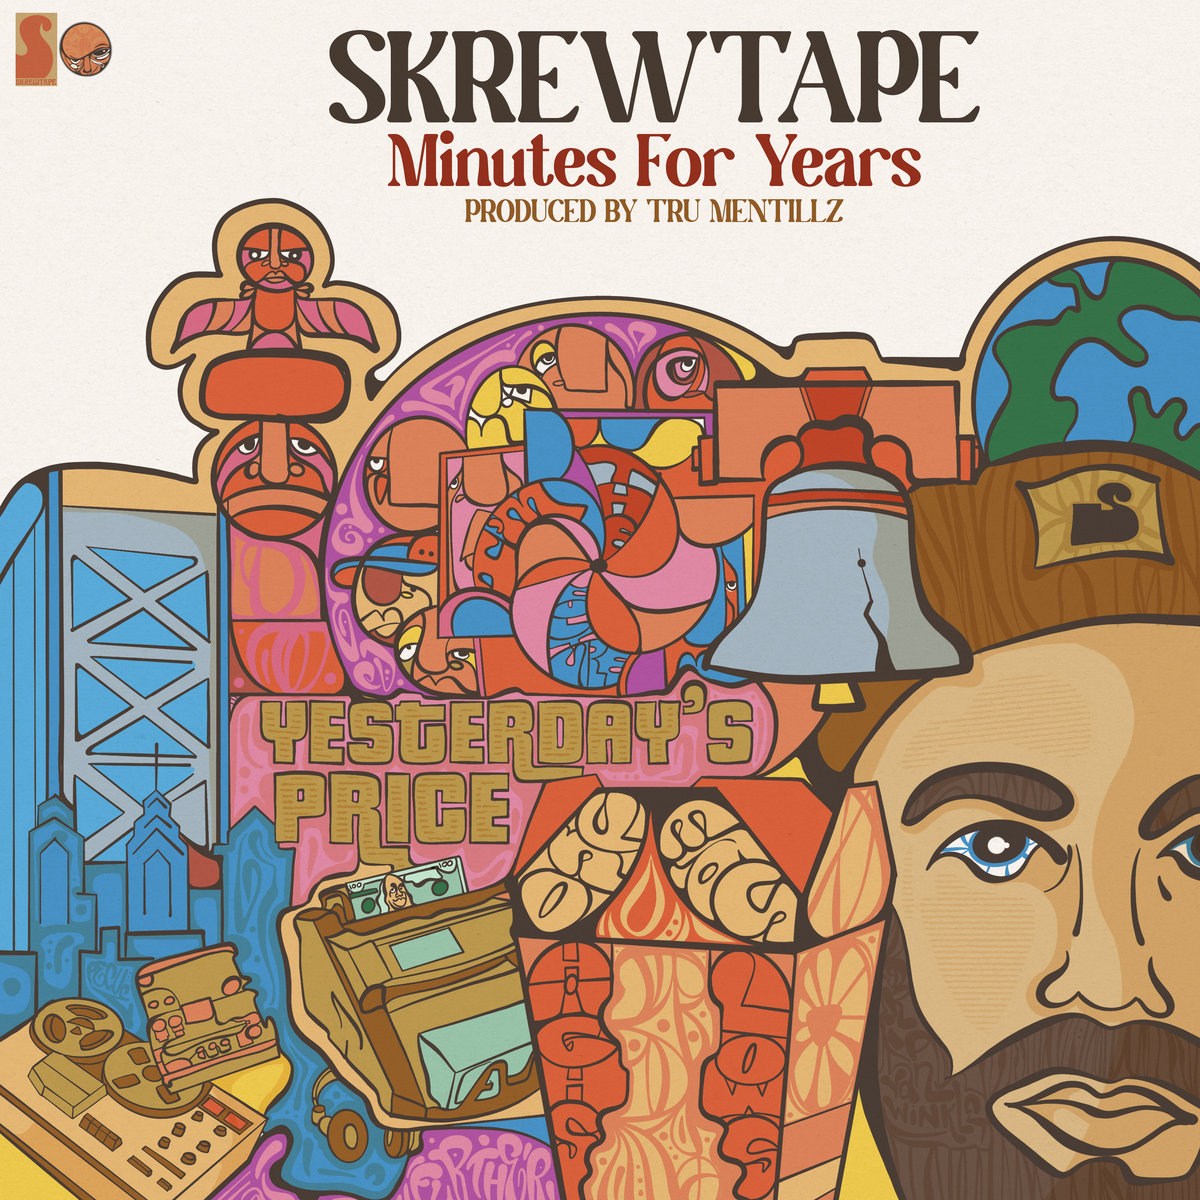 Mintues_for_years_skrewtape